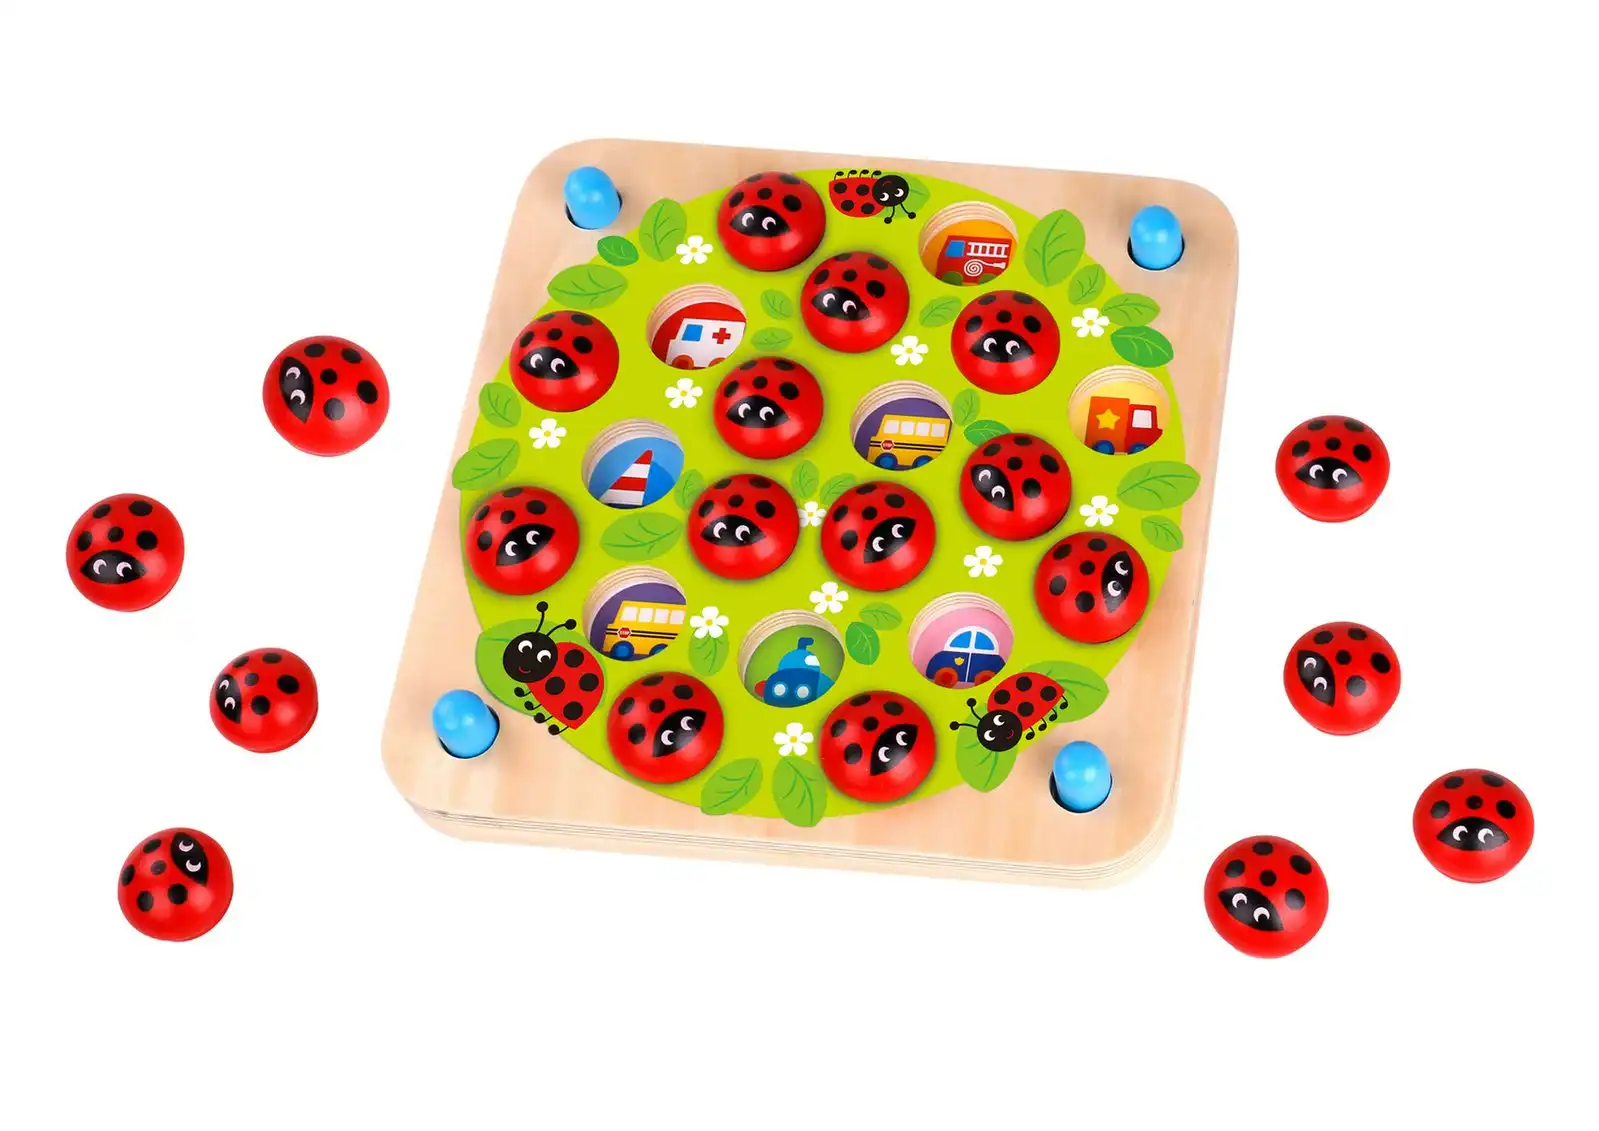 Tooky Toy Ladybug Educational Children's Memory Tabletop Matching Game 3y+